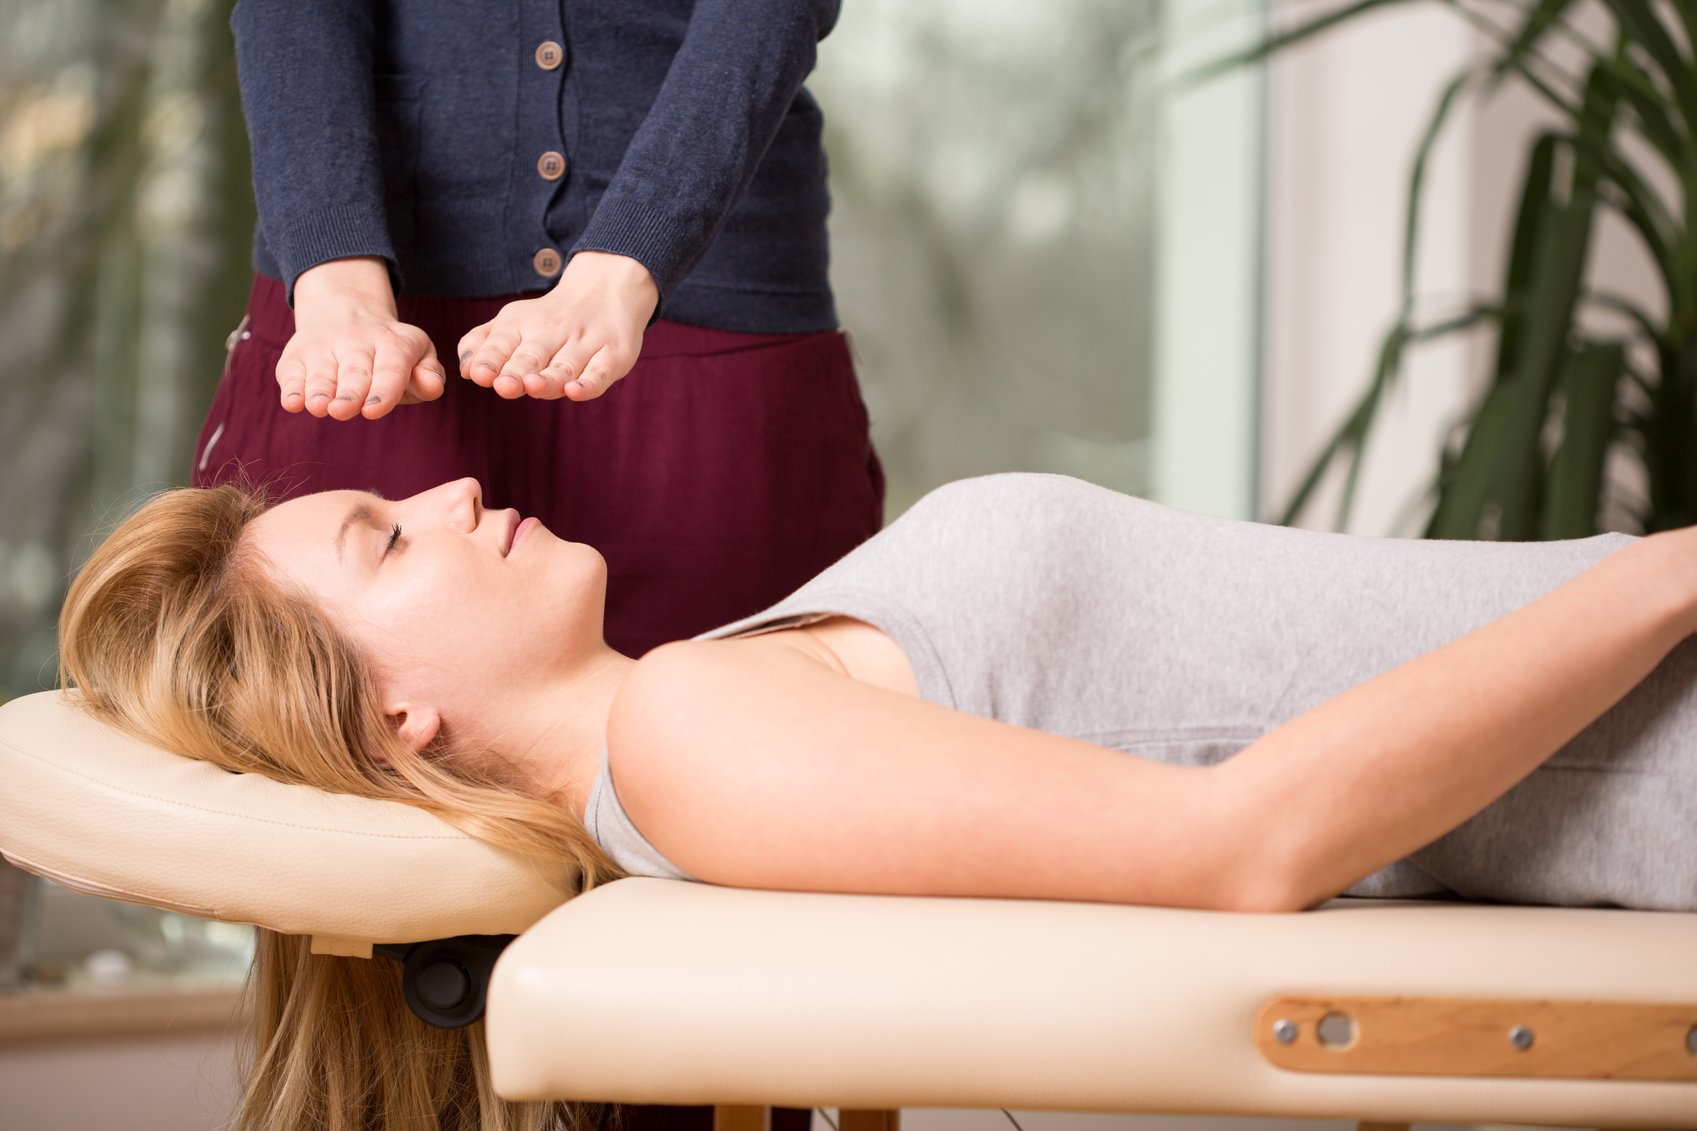 Young woman relaxing during bioenergy therapy session